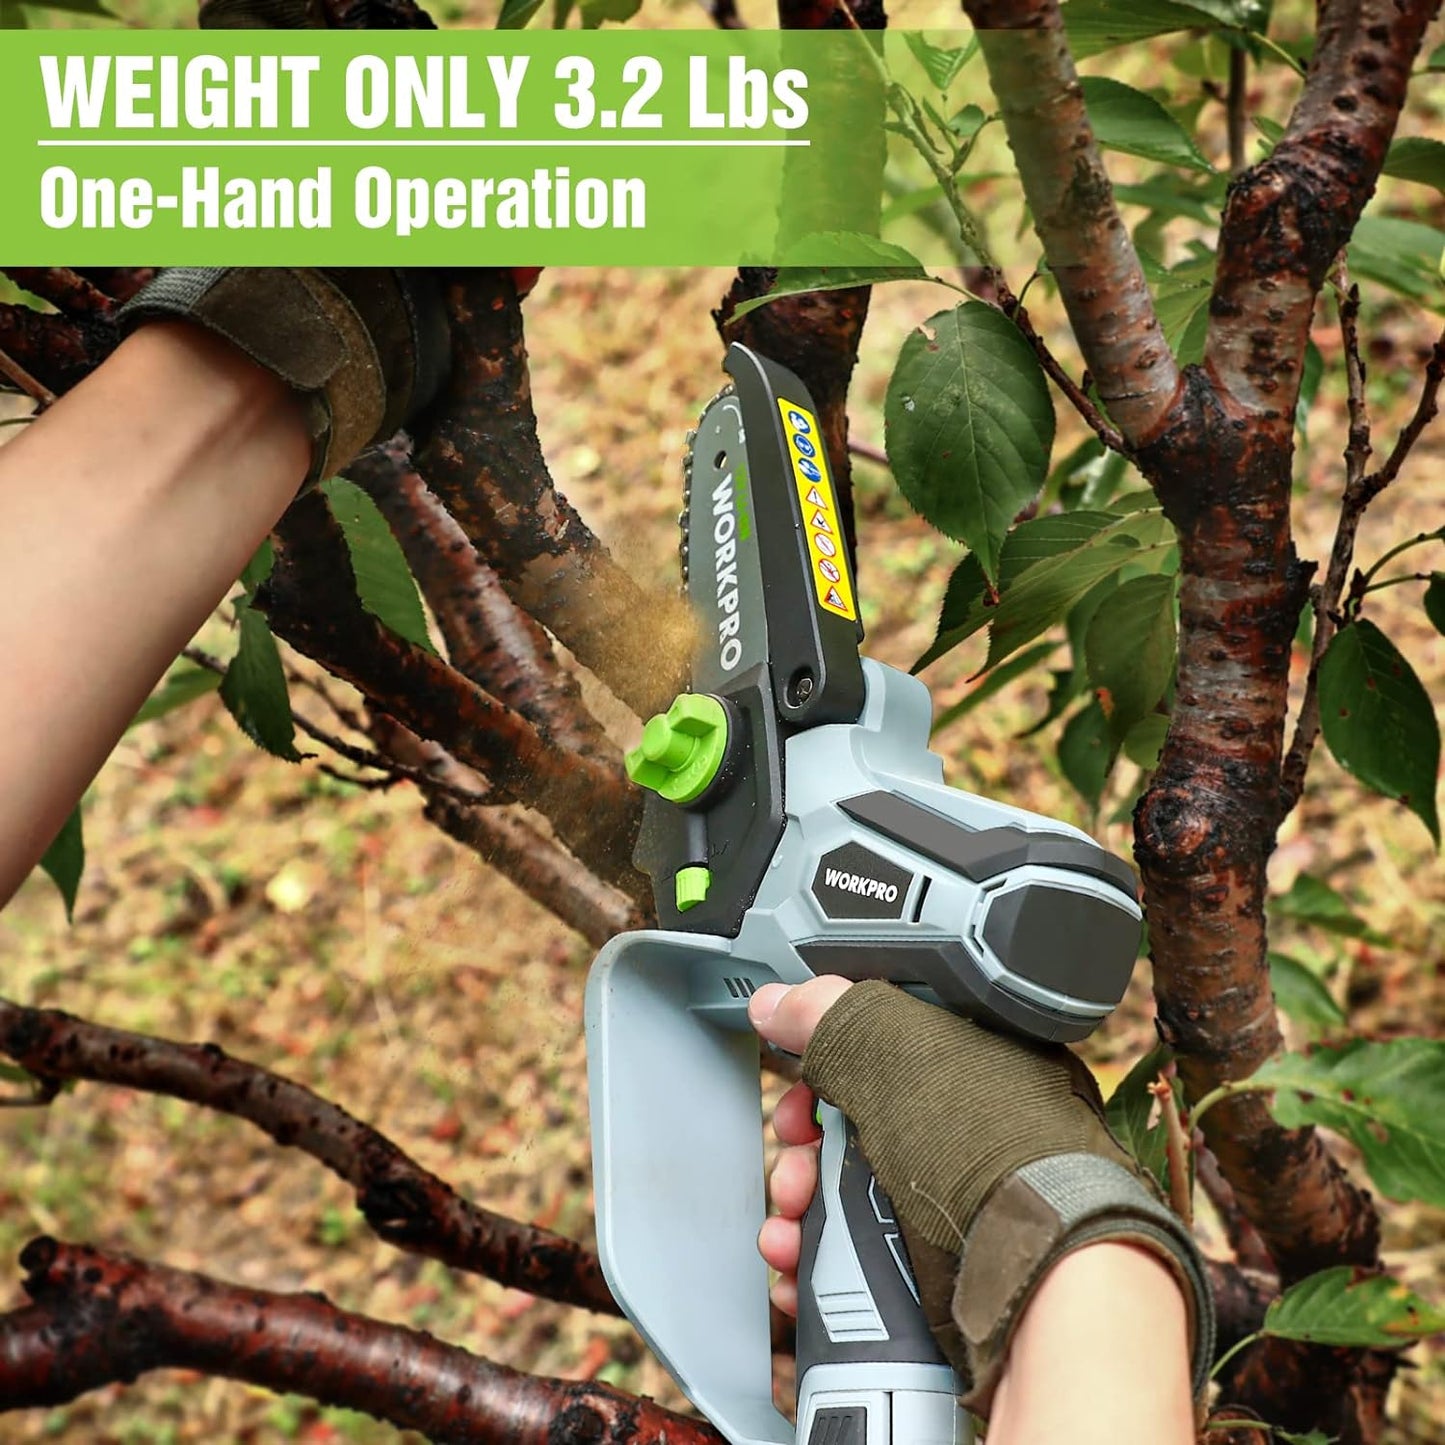 WORKPRO Mini Chainsaw, 6.3\u201C Cordless Electric Compact Chain Saw with 2 Batteries, One-Hand Operated Portable Wood Saw with Replacement Guide Bar and Chain for Garden Tree Branch Pruning, Wood Cutting